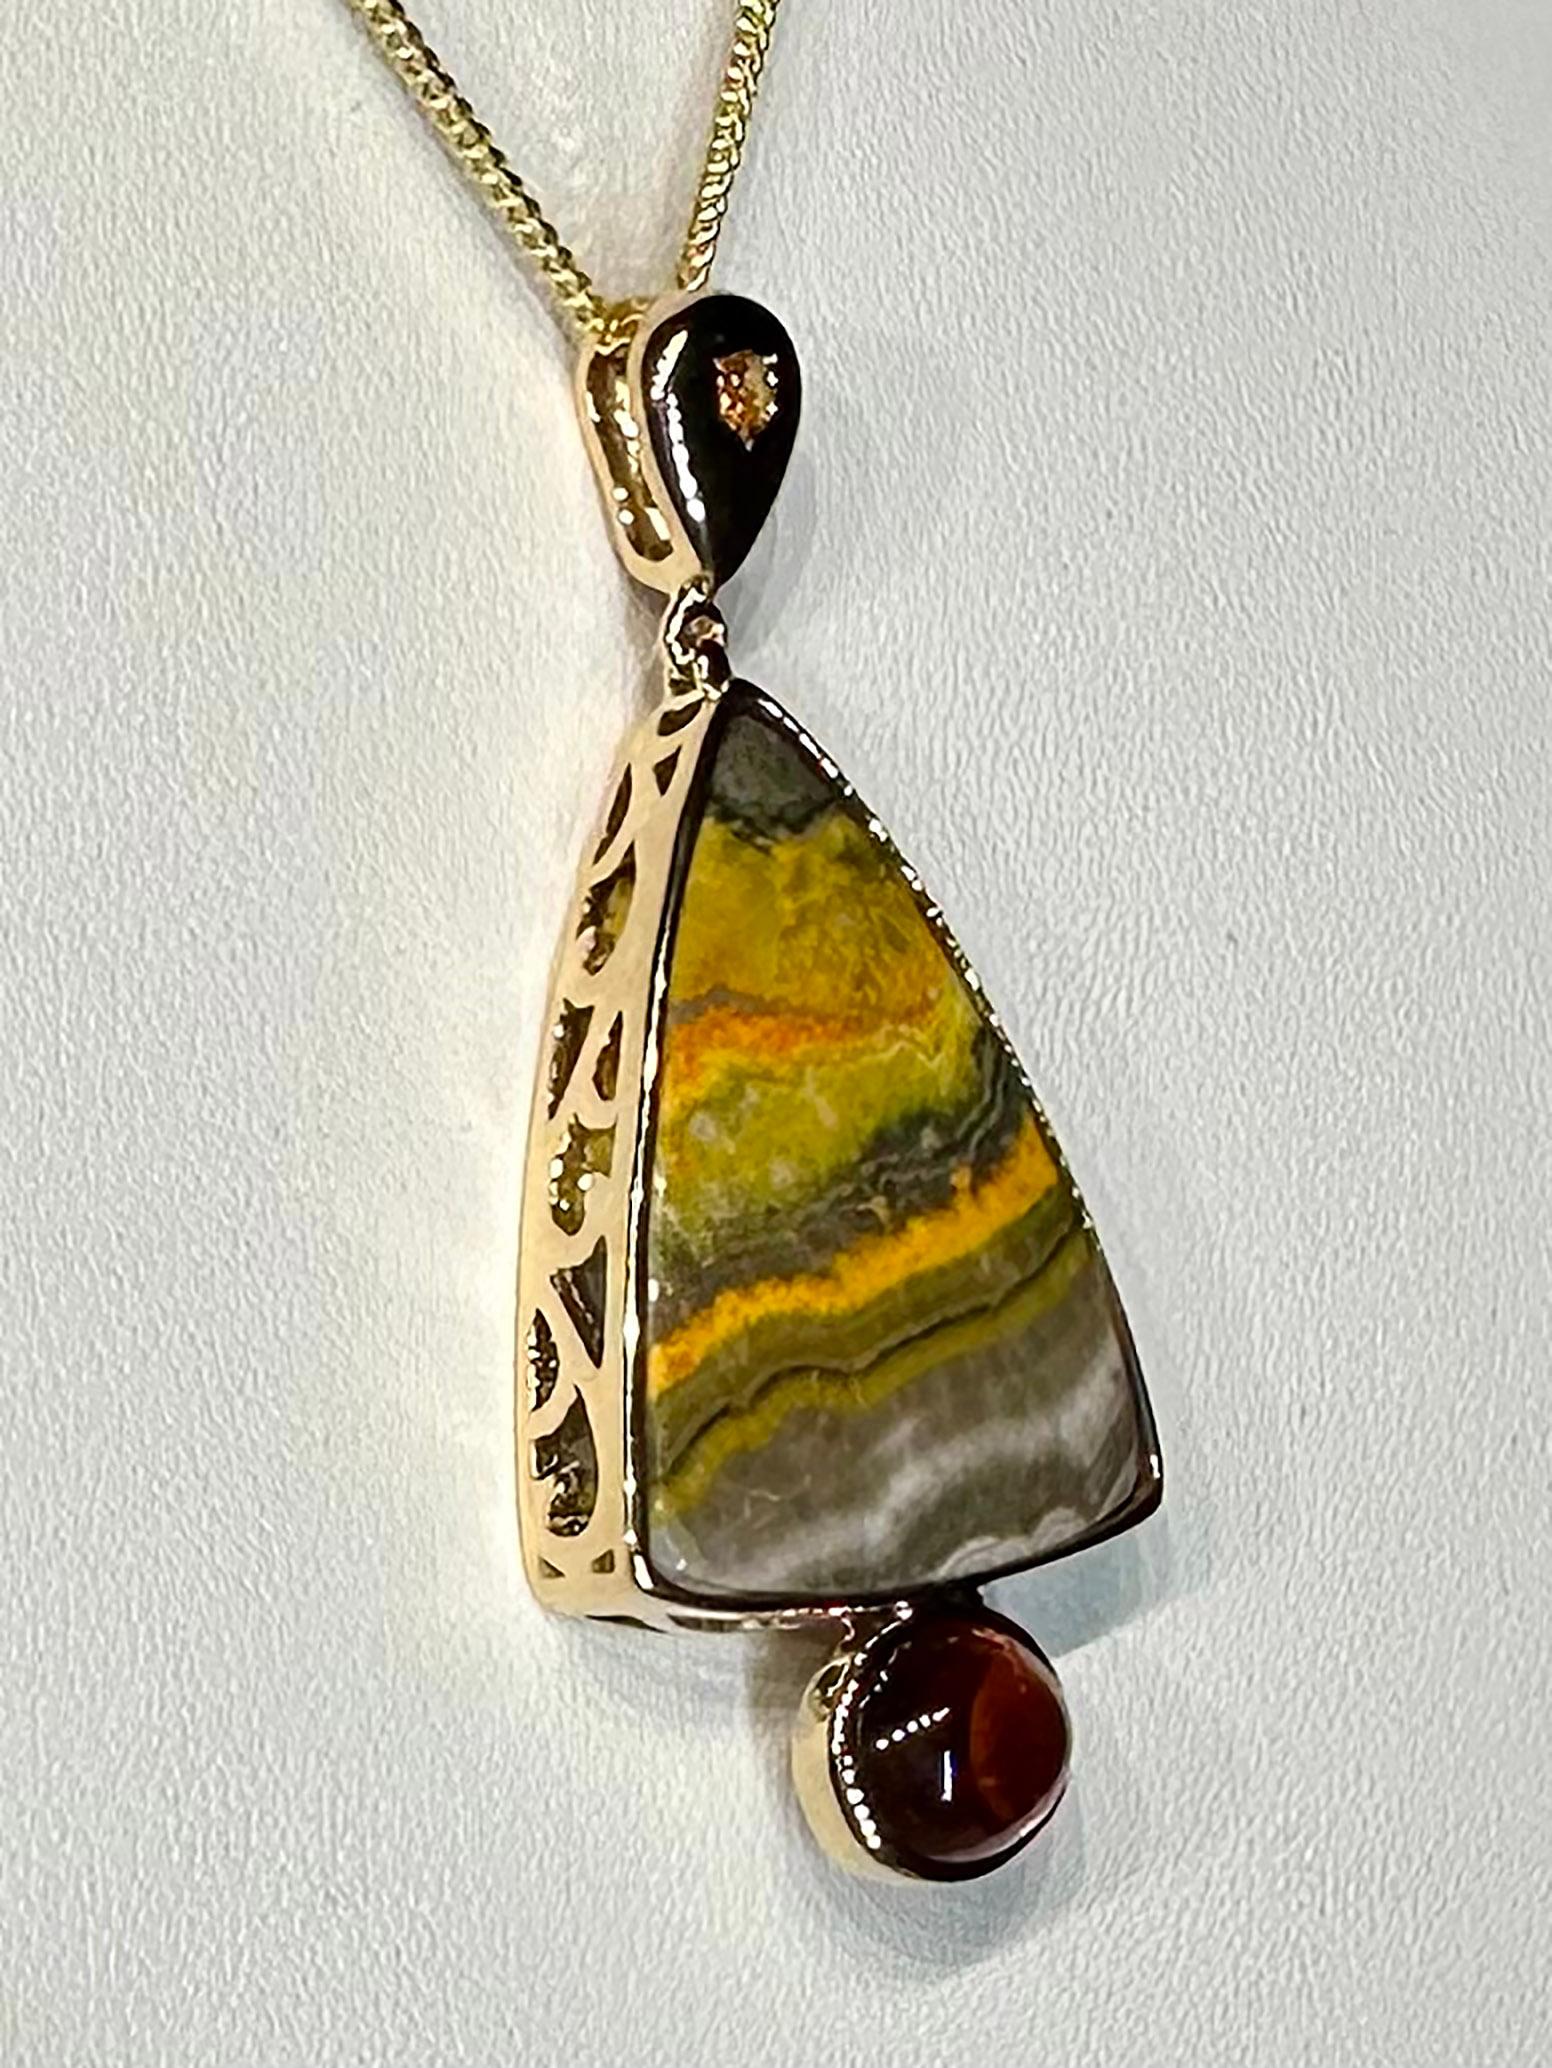 A 14kt Yellow Gold Pendant with Sapphire, Jasper & a Spessartine Garnet Cabochon. An exquisite 14kt Yellow Gold Pendant featuring a Sapphire, Jasper, and a Spessartine Garnet Cabochon. Elevate your style with this stunning piece of fine